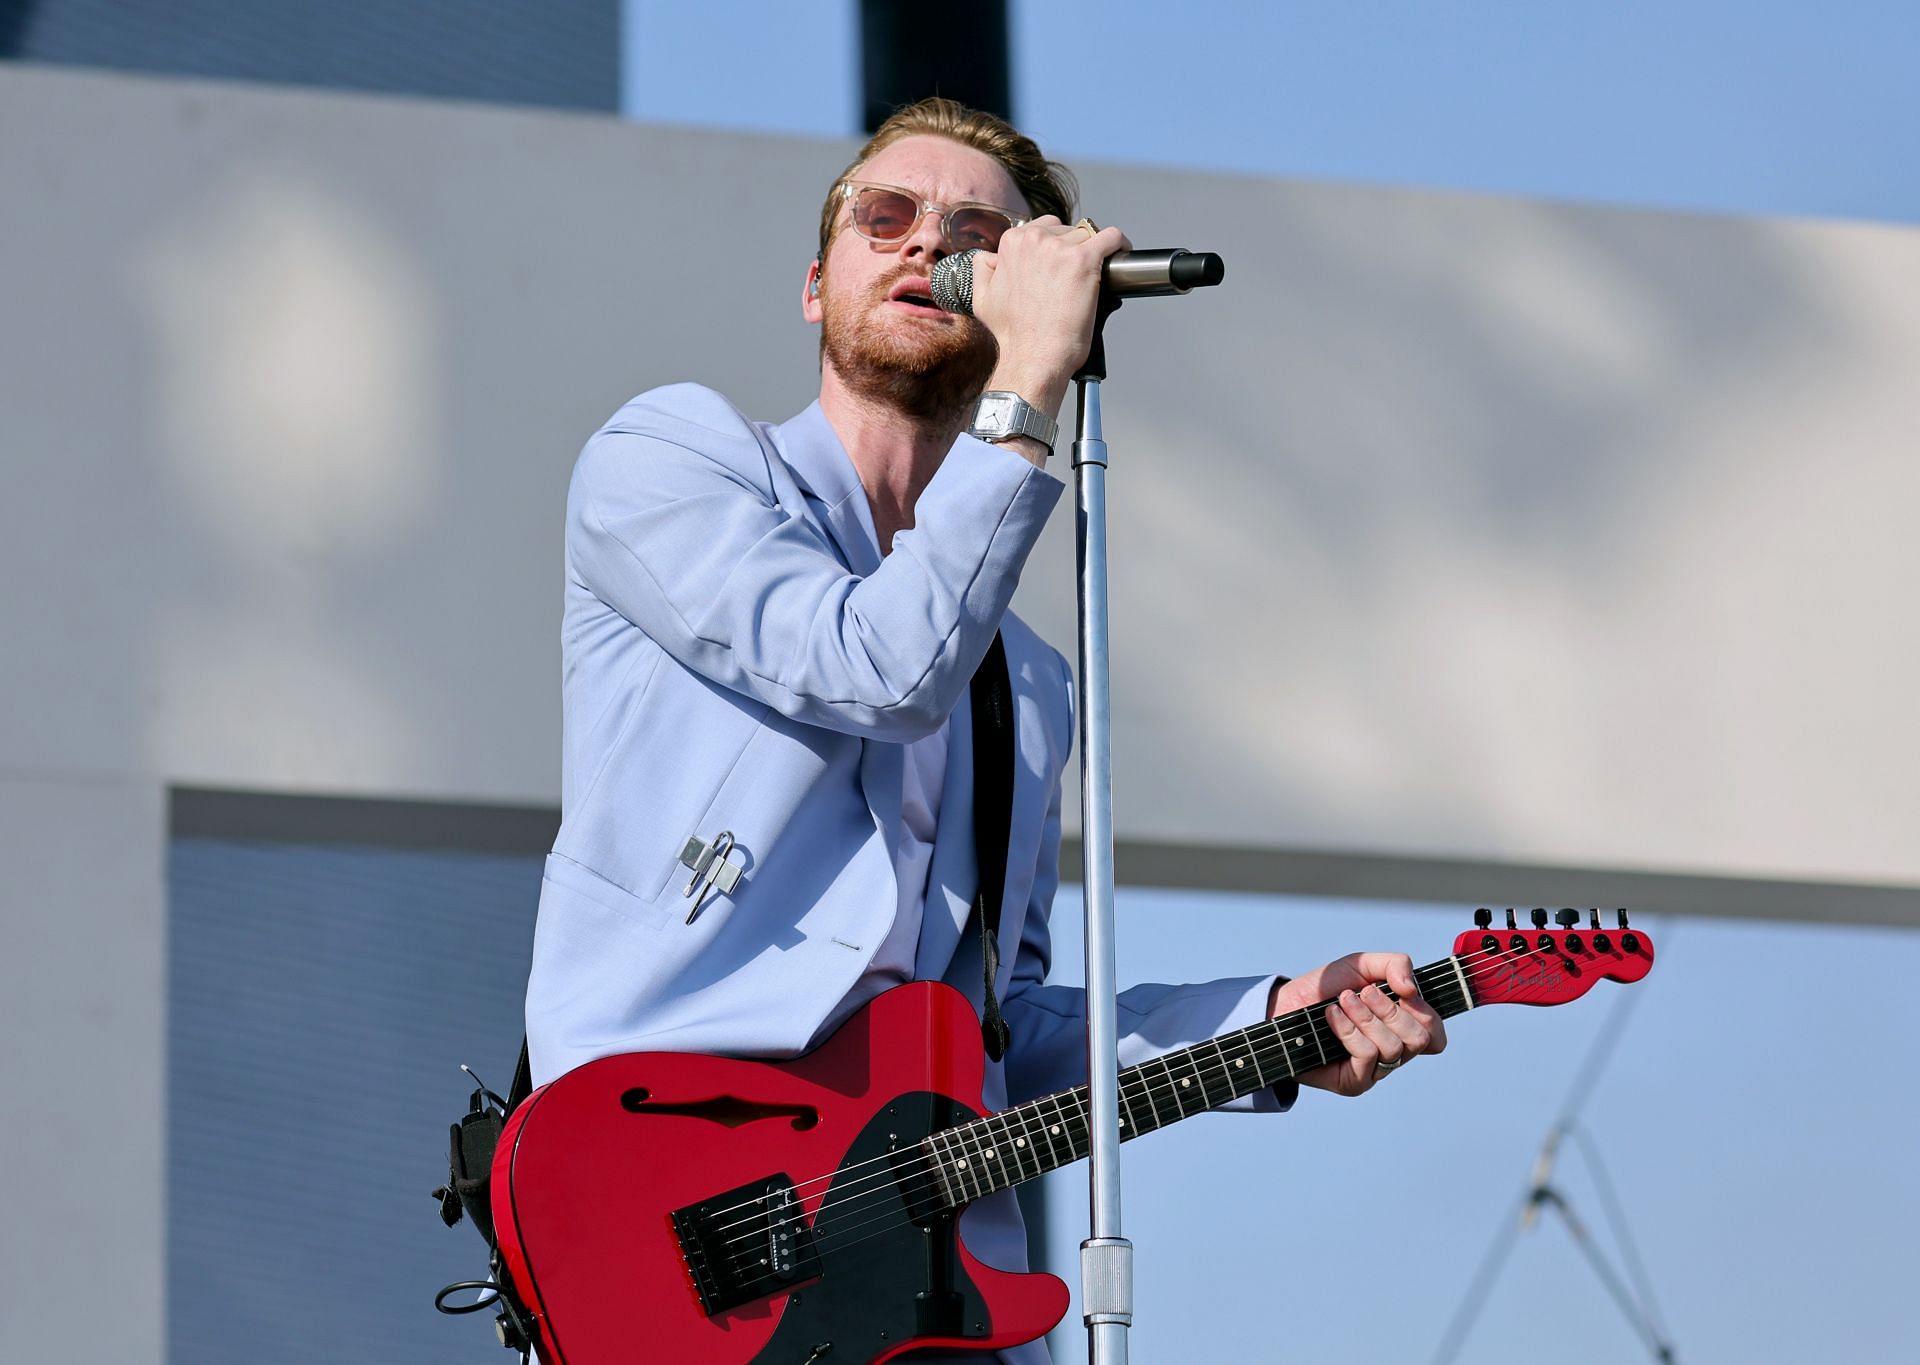 2022 Coachella Valley Music And Arts Festival - Weekend 2 - Day 3